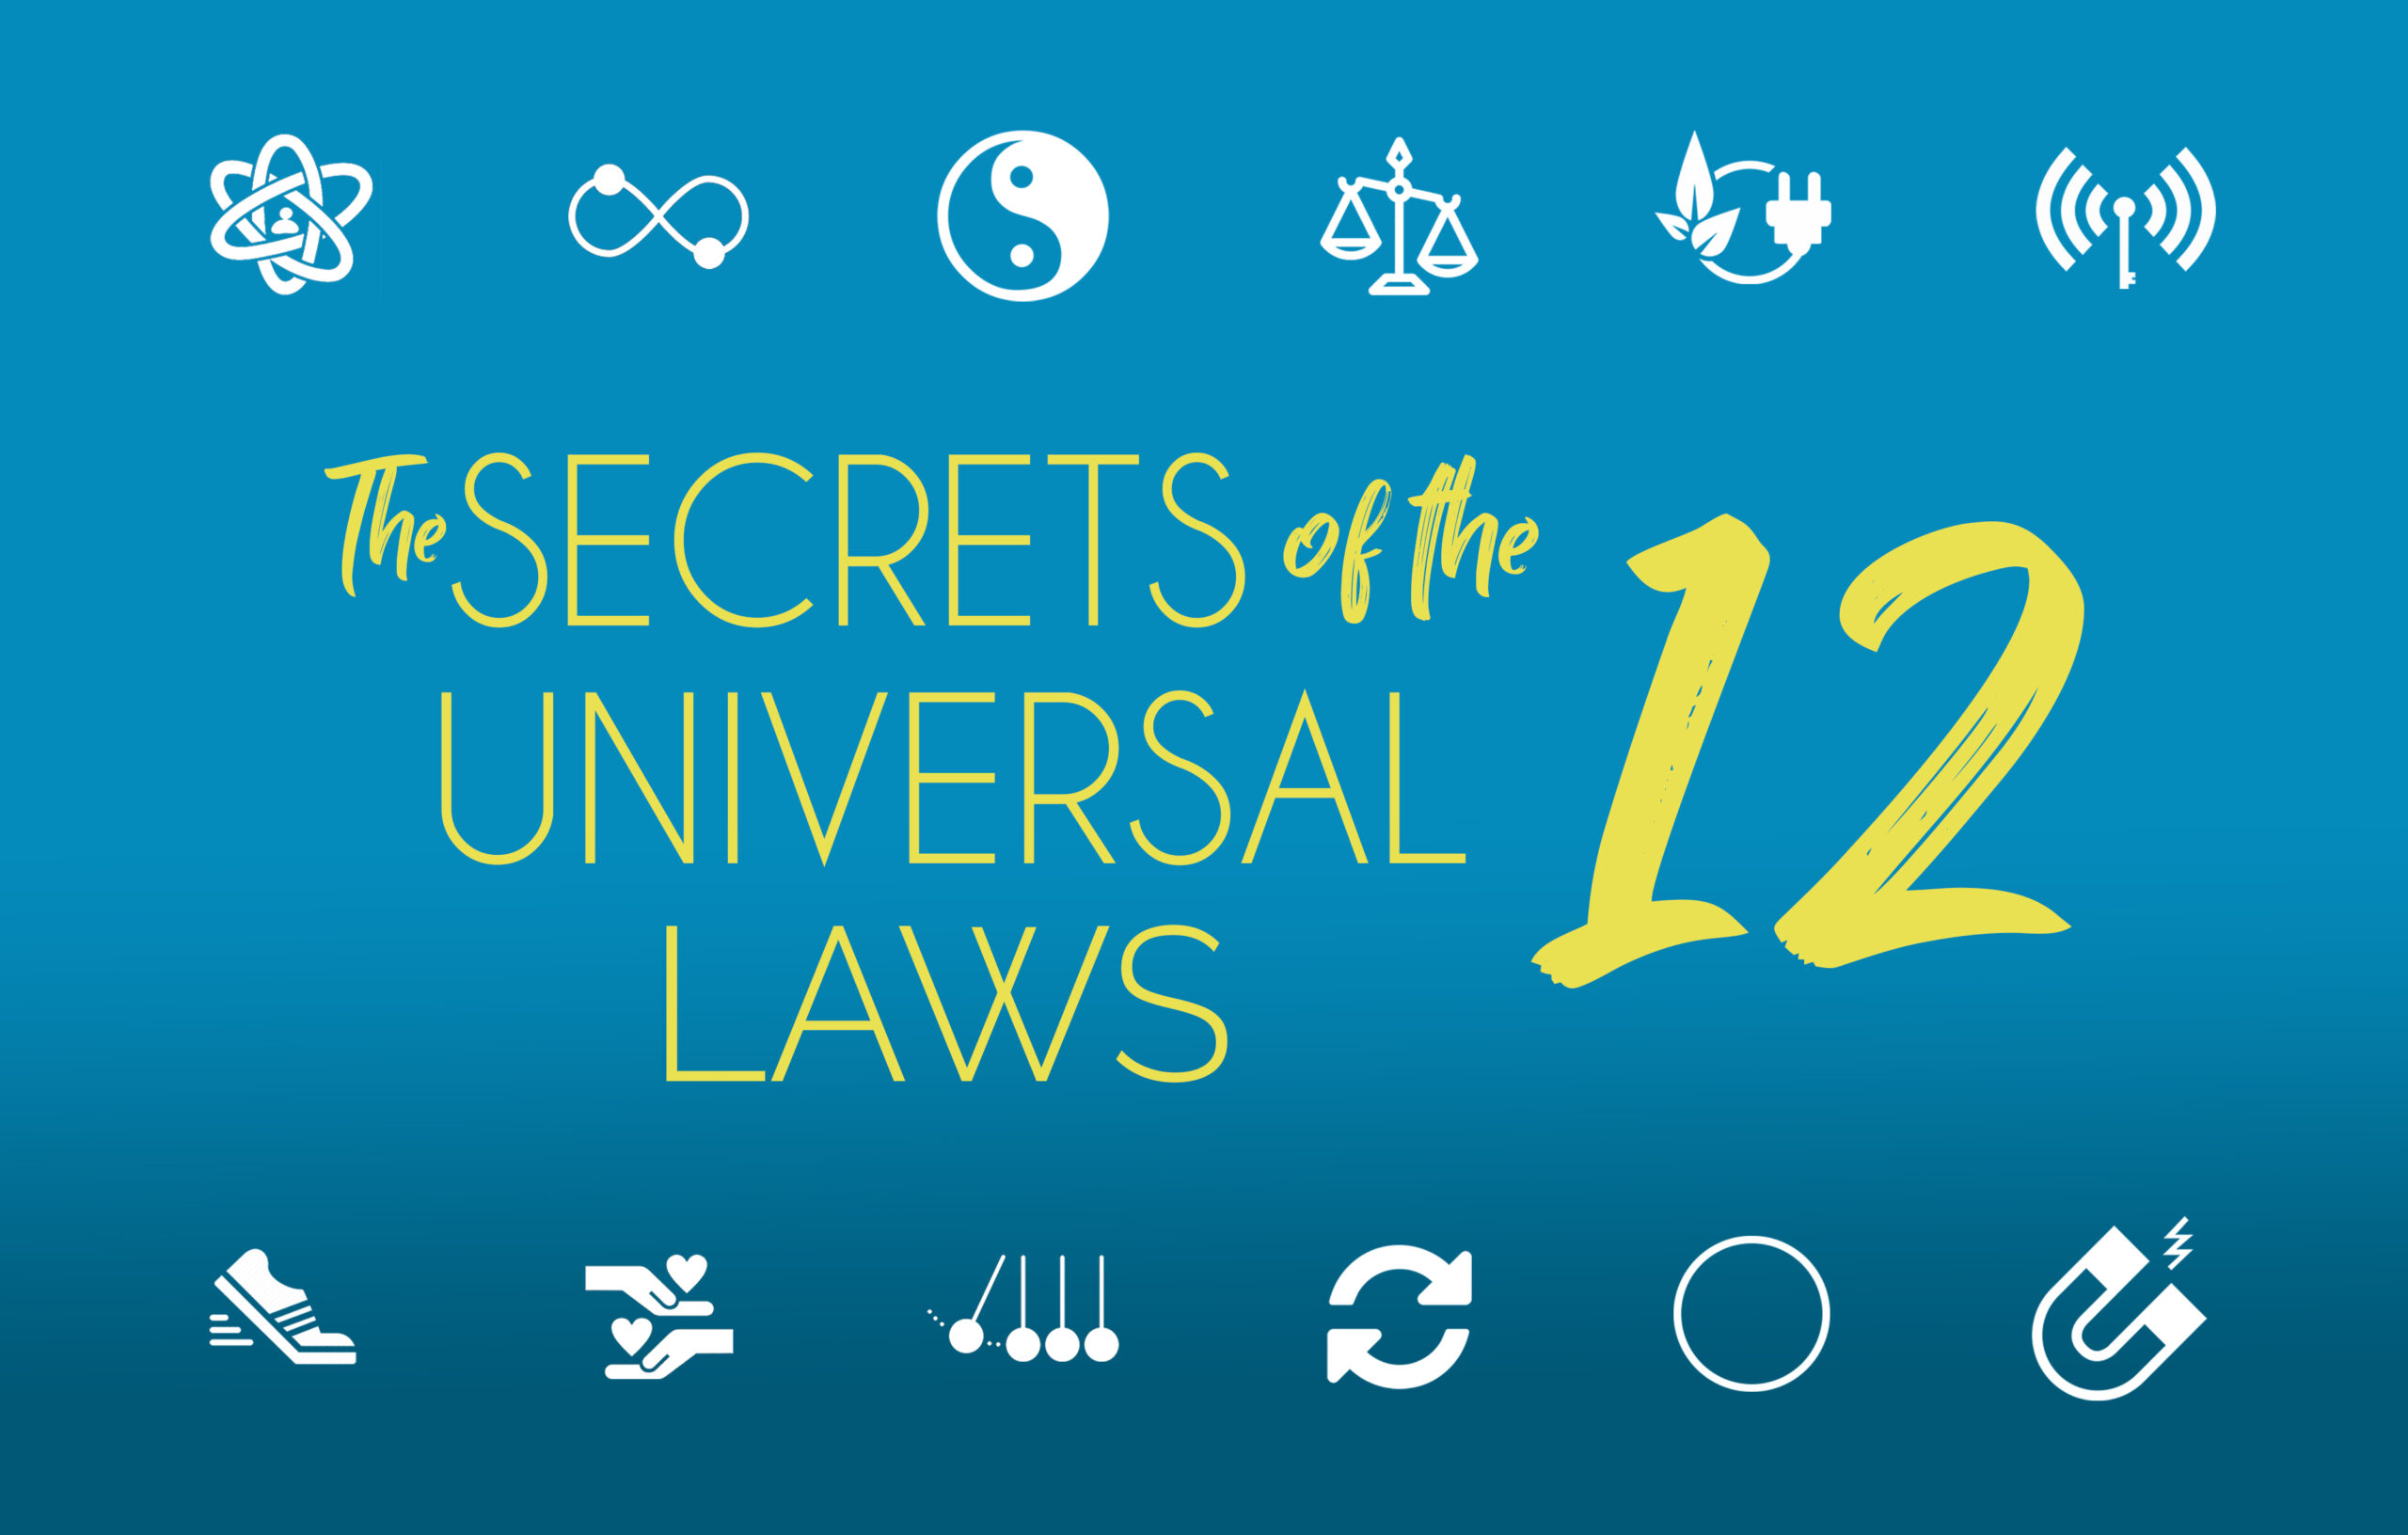 The Secrets of the 12 Universal Laws